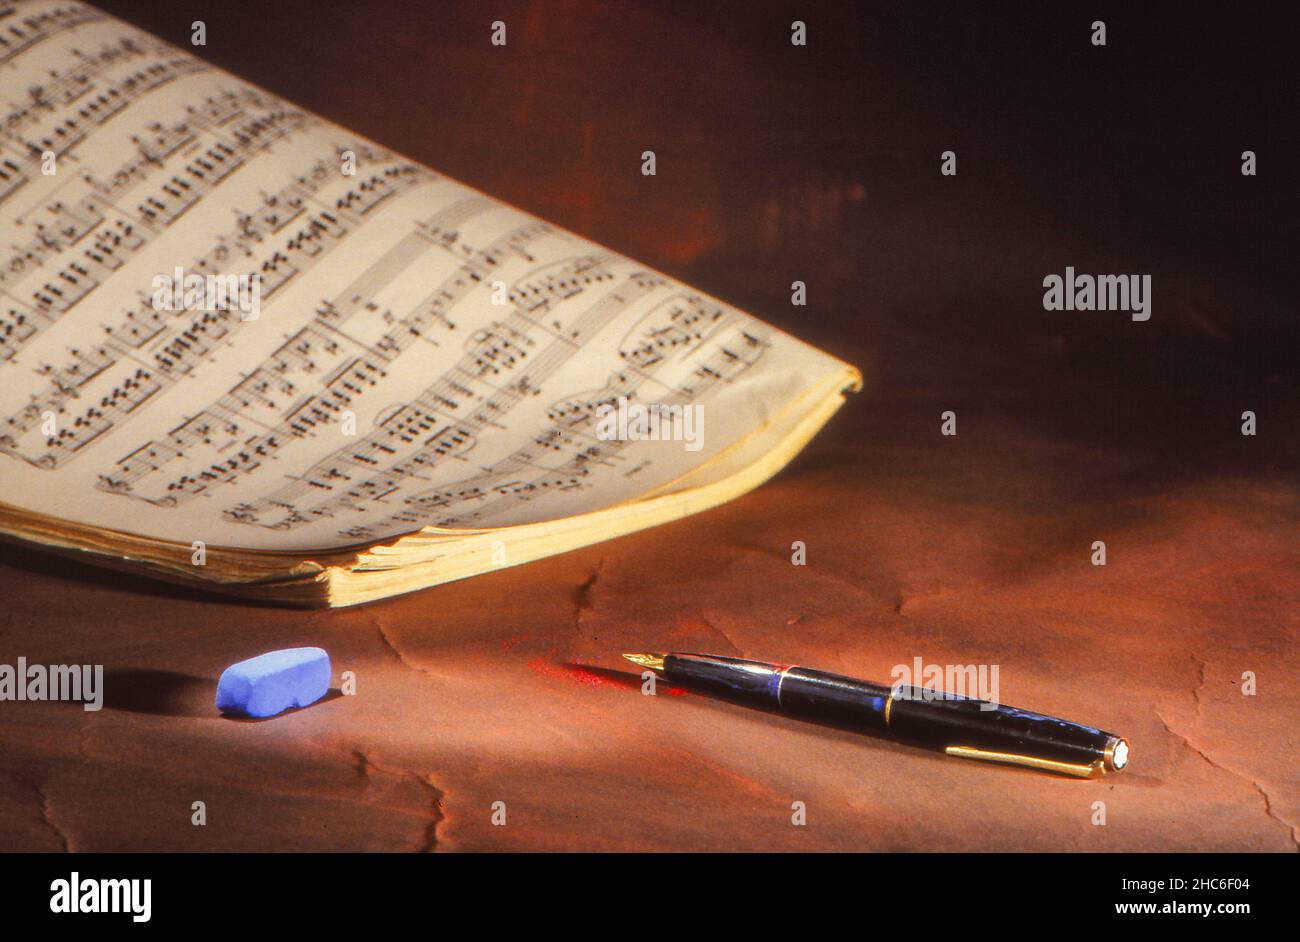 Sheet music, notes, fountain pen and chalk Stock Photo